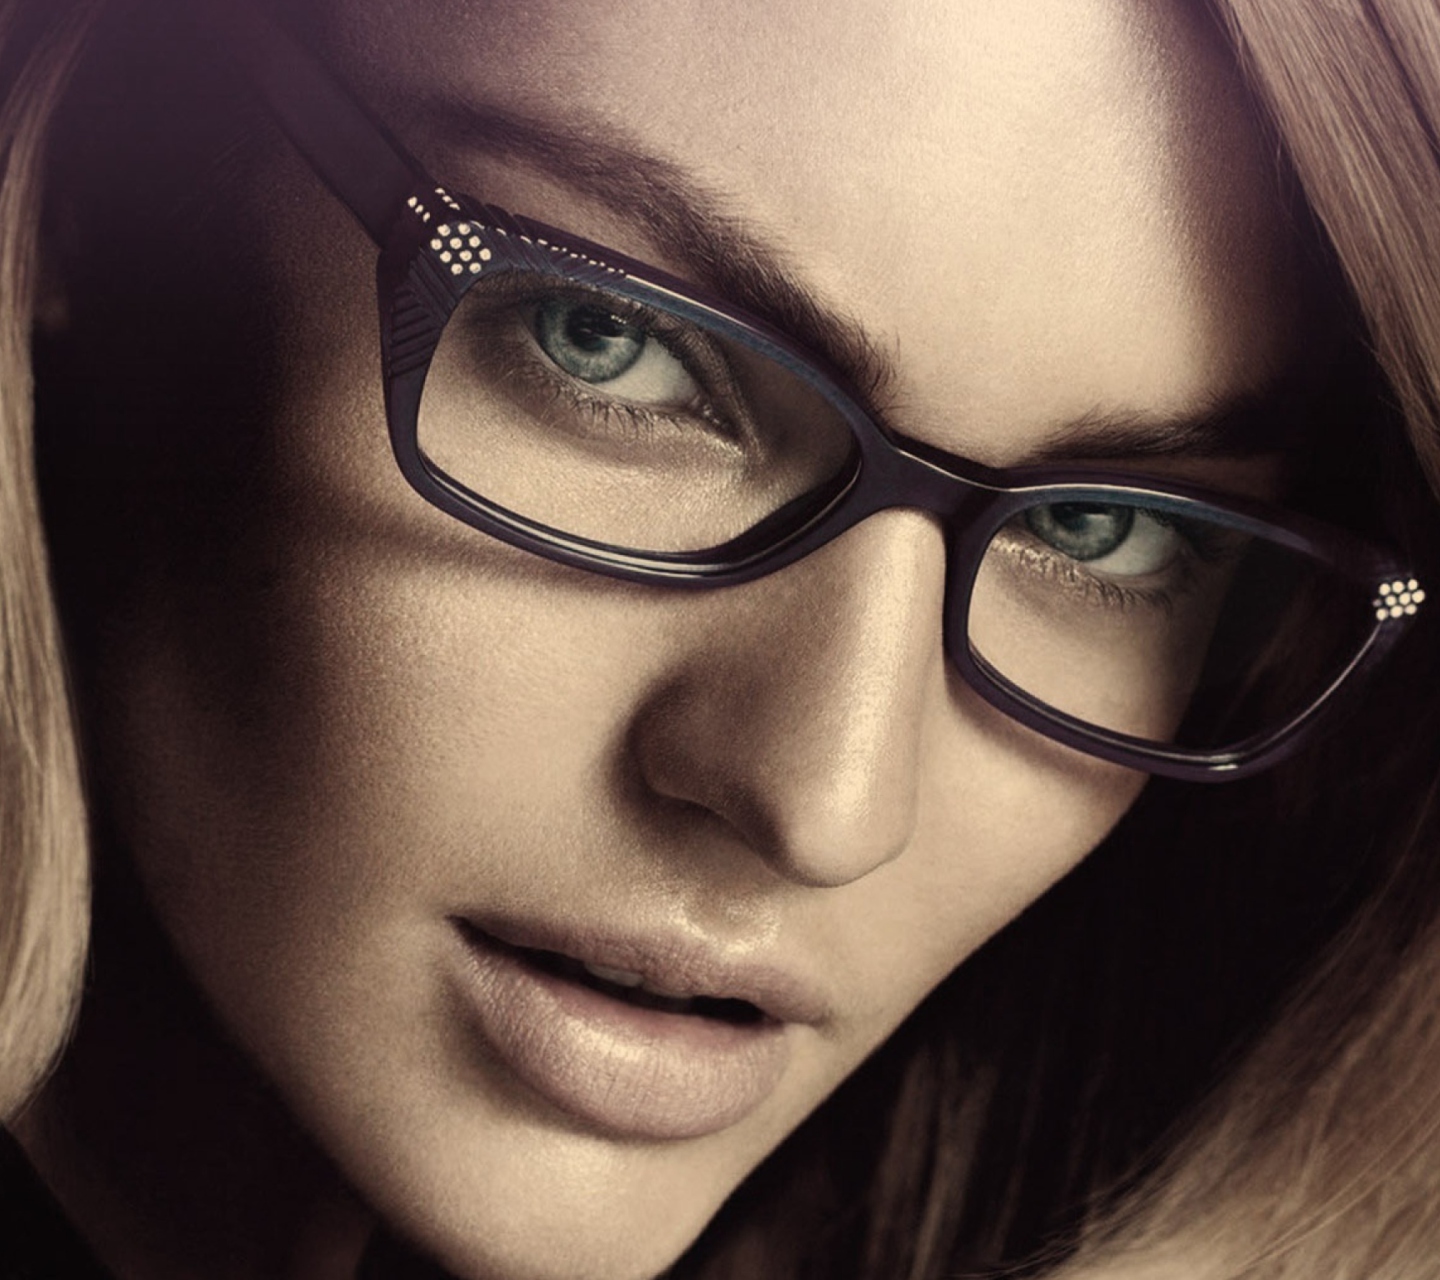 Candice Swanepoel In Glasses wallpaper 1440x1280